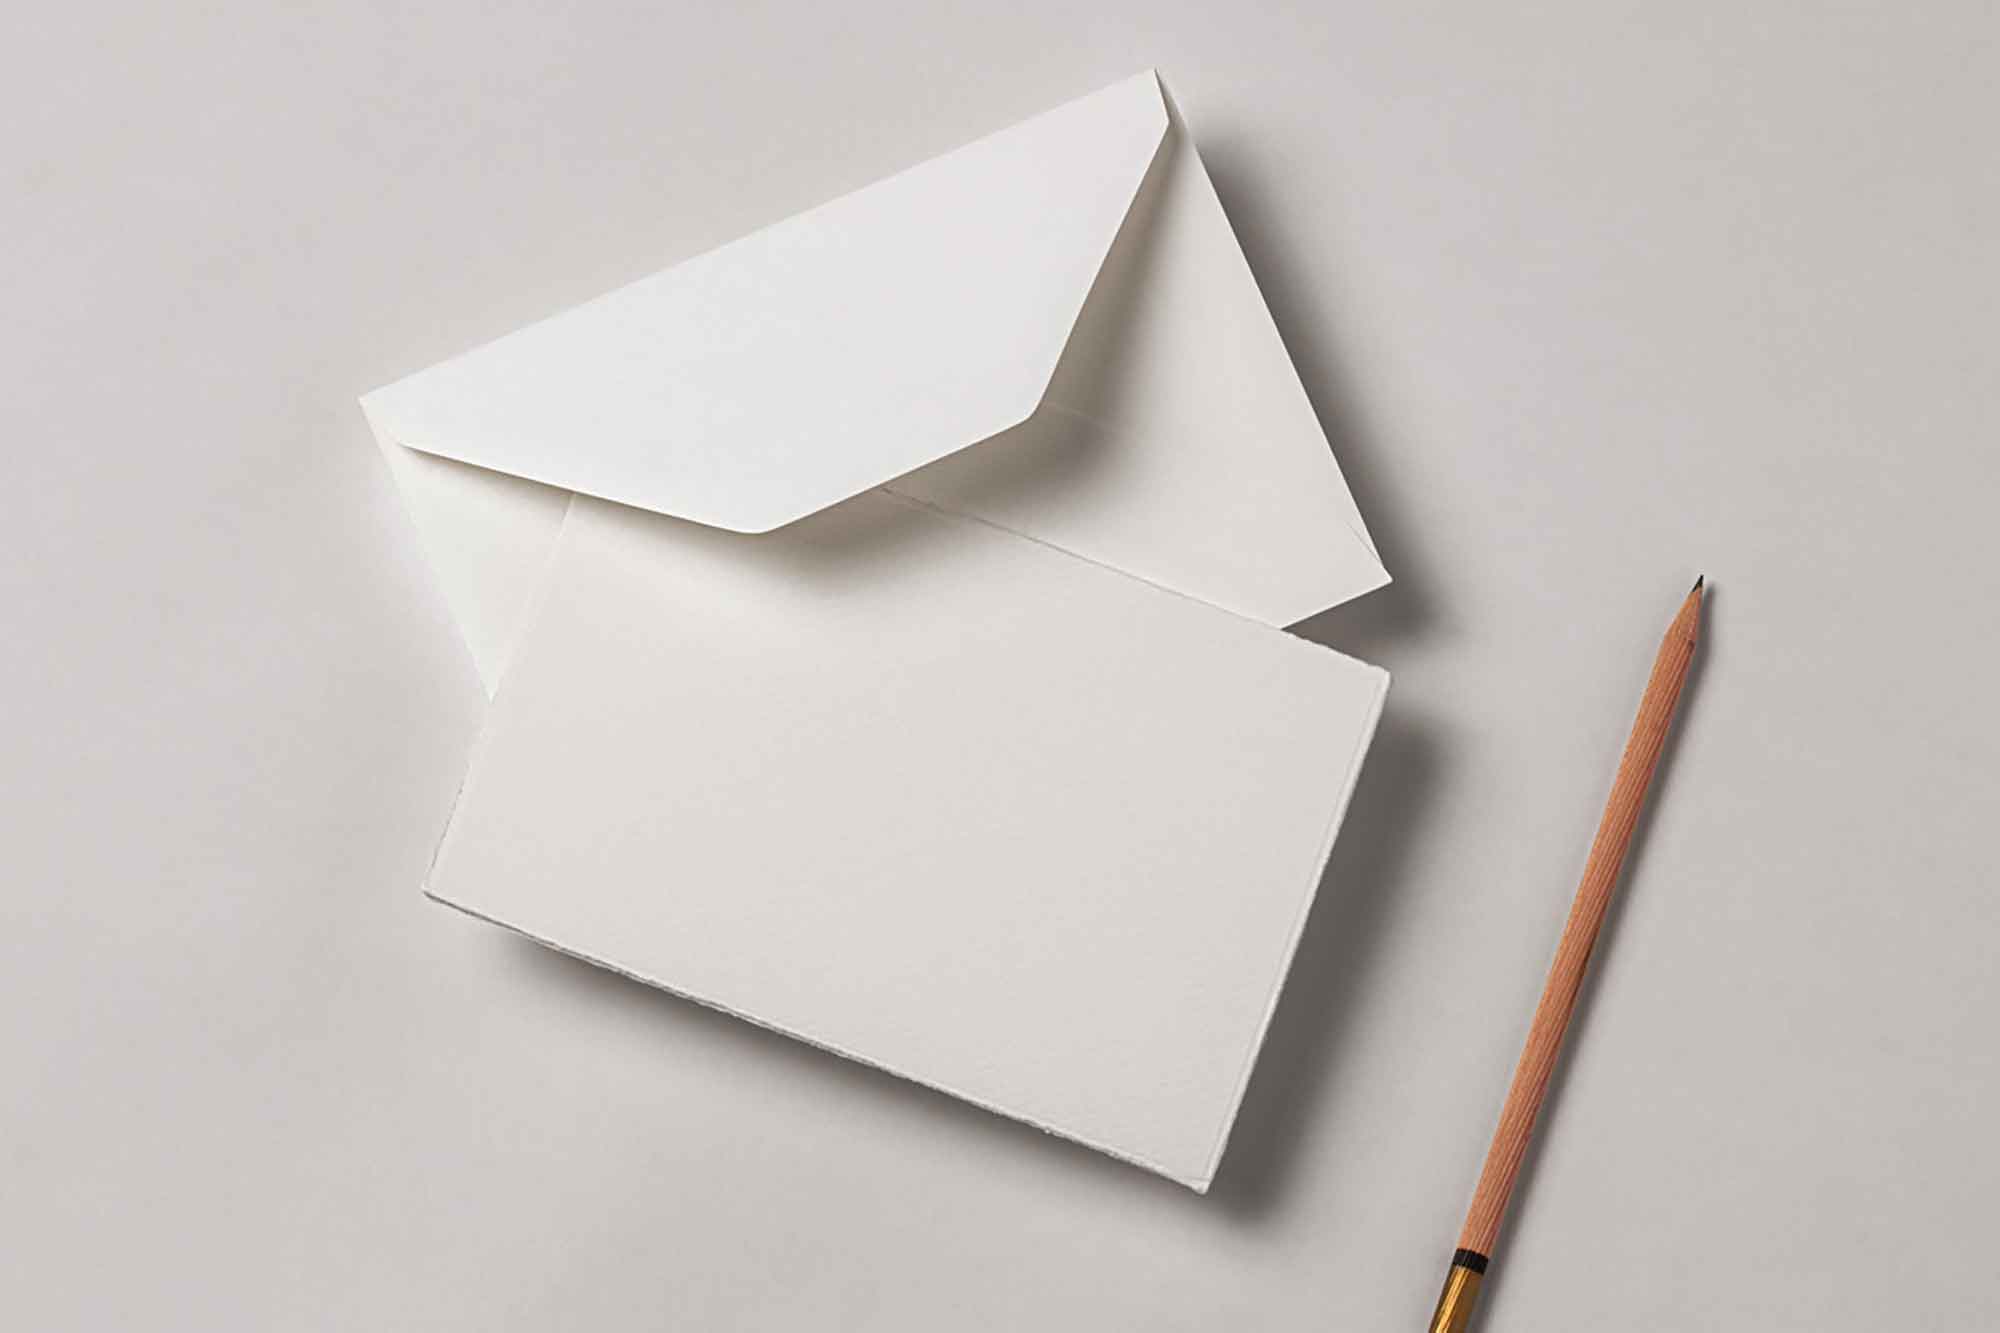  Recycled Paper Invitation Card Mockup